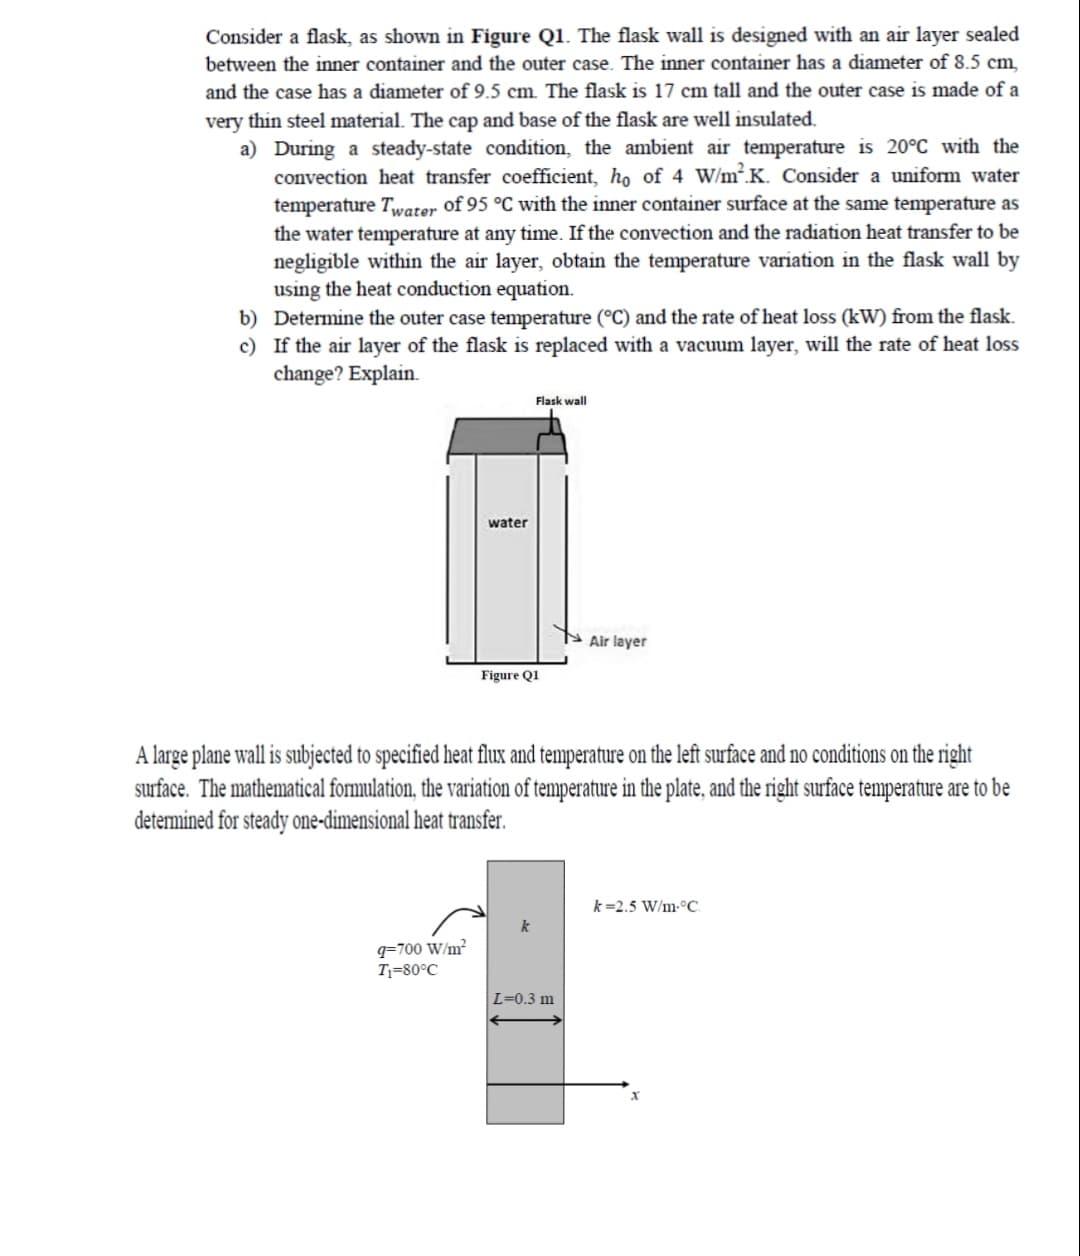 Consider a flask, as shown in Figure Q1. The flask wall is designed with an air layer sealed
between the inner container and the outer case. The inner container has a diameter of 8.5 cm,
and the case has a diameter of 9.5 cm. The flask is 17 cm tall and the outer case is made of a
very thin steel material. The cap and base of the flask are well insulated.
a) During a steady-state condition, the ambient air temperature is 20°C with the
convection heat transfer coefficient, ho of 4 W/m².K. Consider a uniform water
temperature Twater of 95 °C with the inner container surface at the same temperature as
the water temperature at any time. If the convection and the radiation heat transfer to be
negligible within the air layer, obtain the temperature variation in the flask wall by
using the heat conduction equation.
b) Determine the outer case temperature (°C) and the rate of heat loss (kW) from the flask.
c) If the air layer of the flask is replaced with a vacuum layer, will the rate of heat loss
change? Explain.
Flask wall
water
Air layer
Figure Q1
A large plane wall is subjected to specified heat flux and temperature on the left surface and no conditions on the right
surface. The mathematical formulation, the variation of temperature in the plate, and the right surface temperature are to be
determined for steady one-dimensional heat transfer.
k=2.5 W/m-°C.
q=700 W/m²
T;=80°C
L=0.3 m
